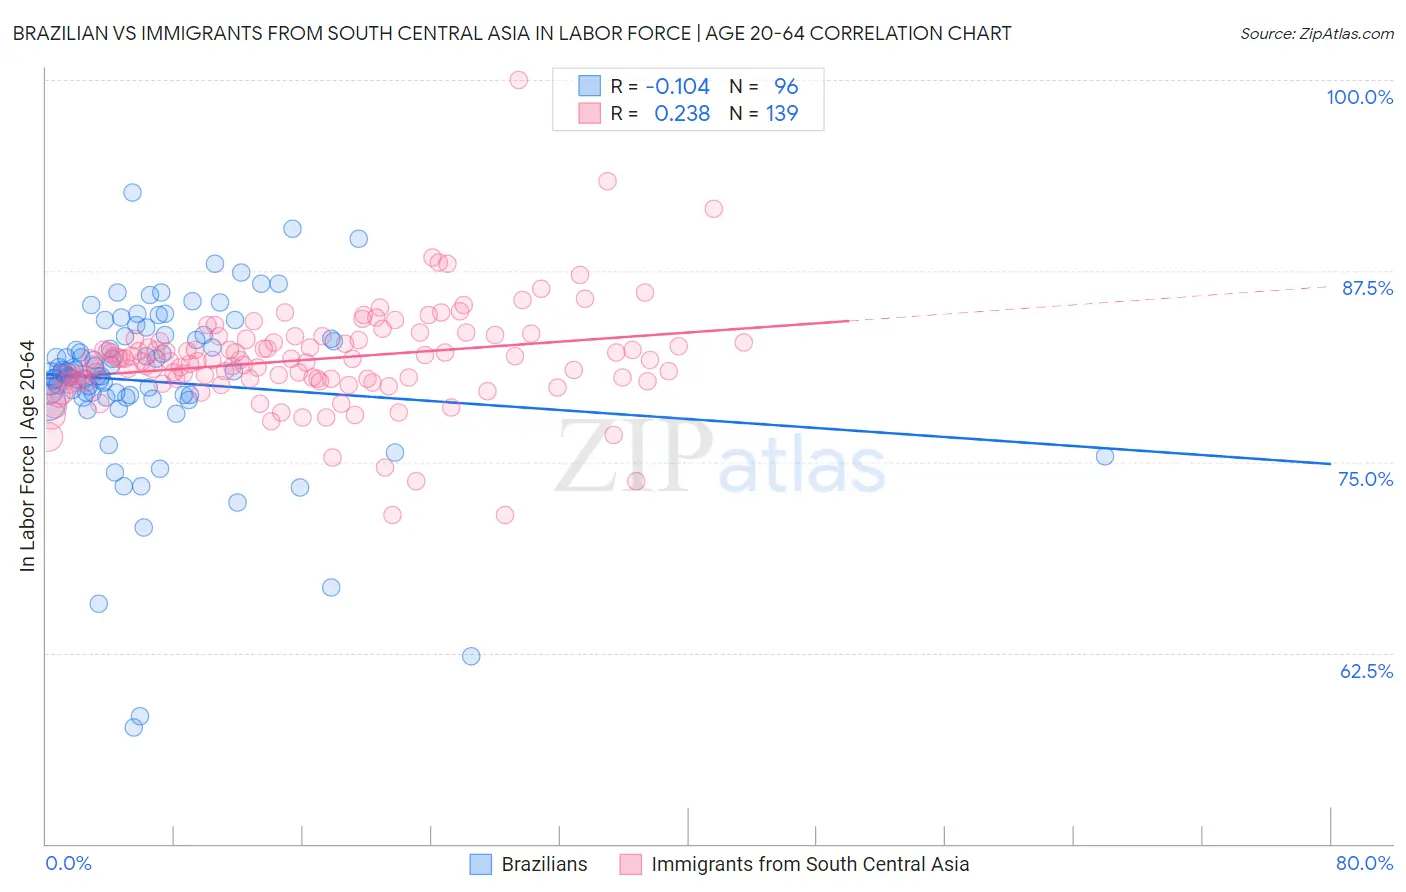 Brazilian vs Immigrants from South Central Asia In Labor Force | Age 20-64